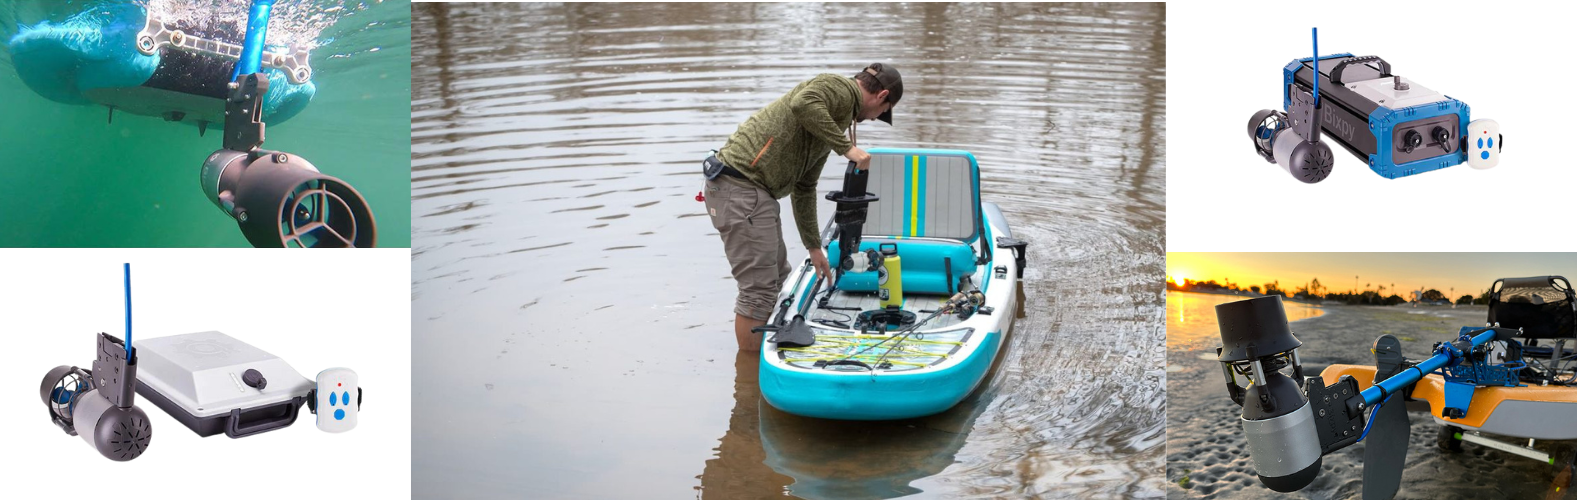 How to Add a Motor to Your Kayak Without the Hassle